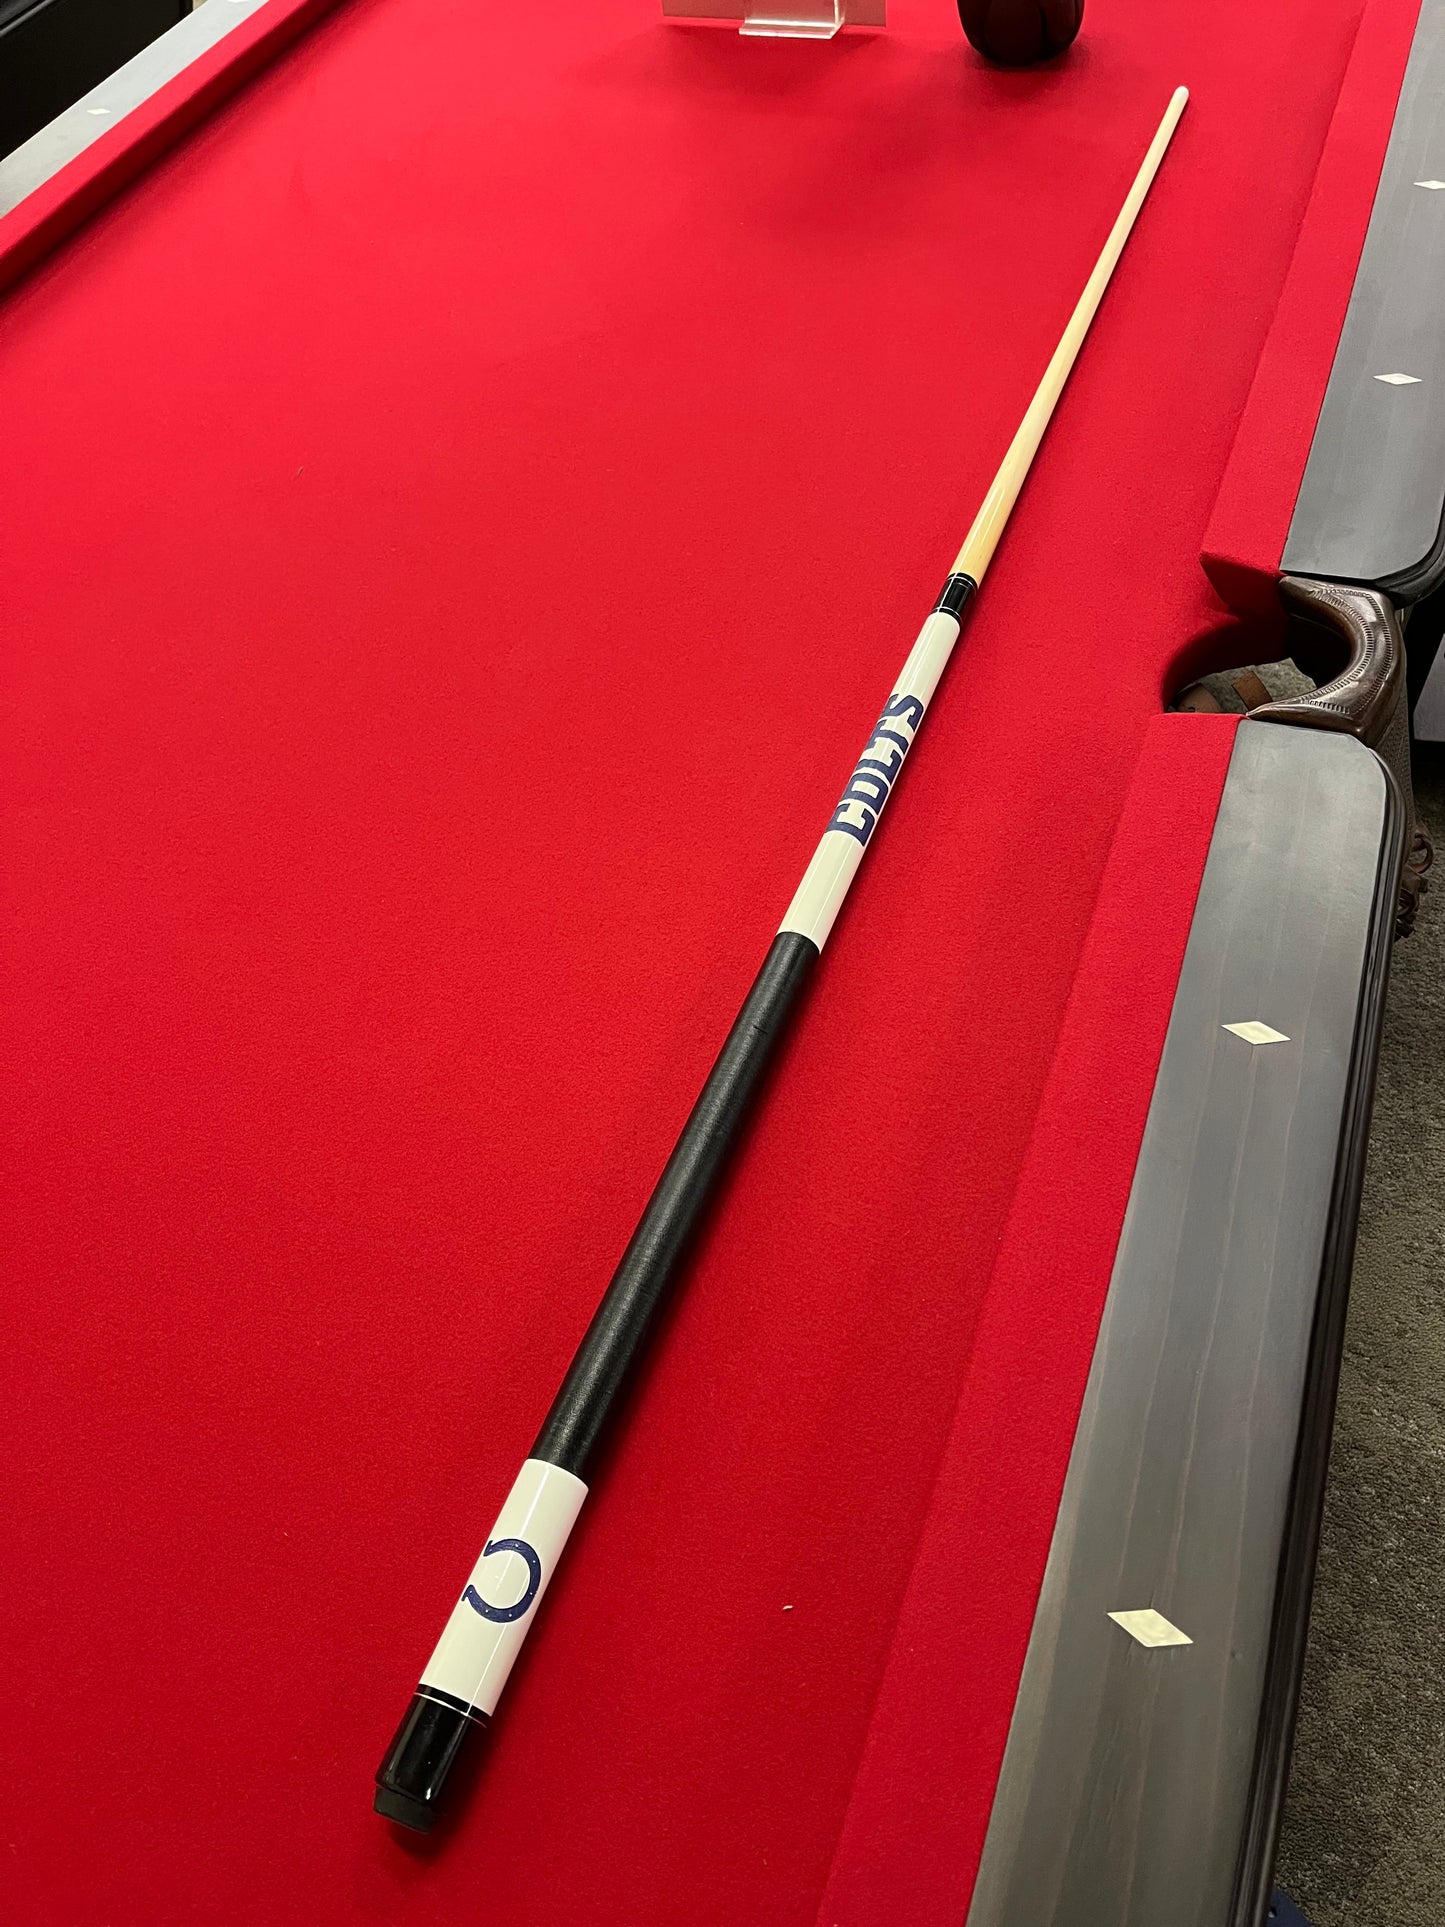 Indianapolis Colts Laser Etched Cue